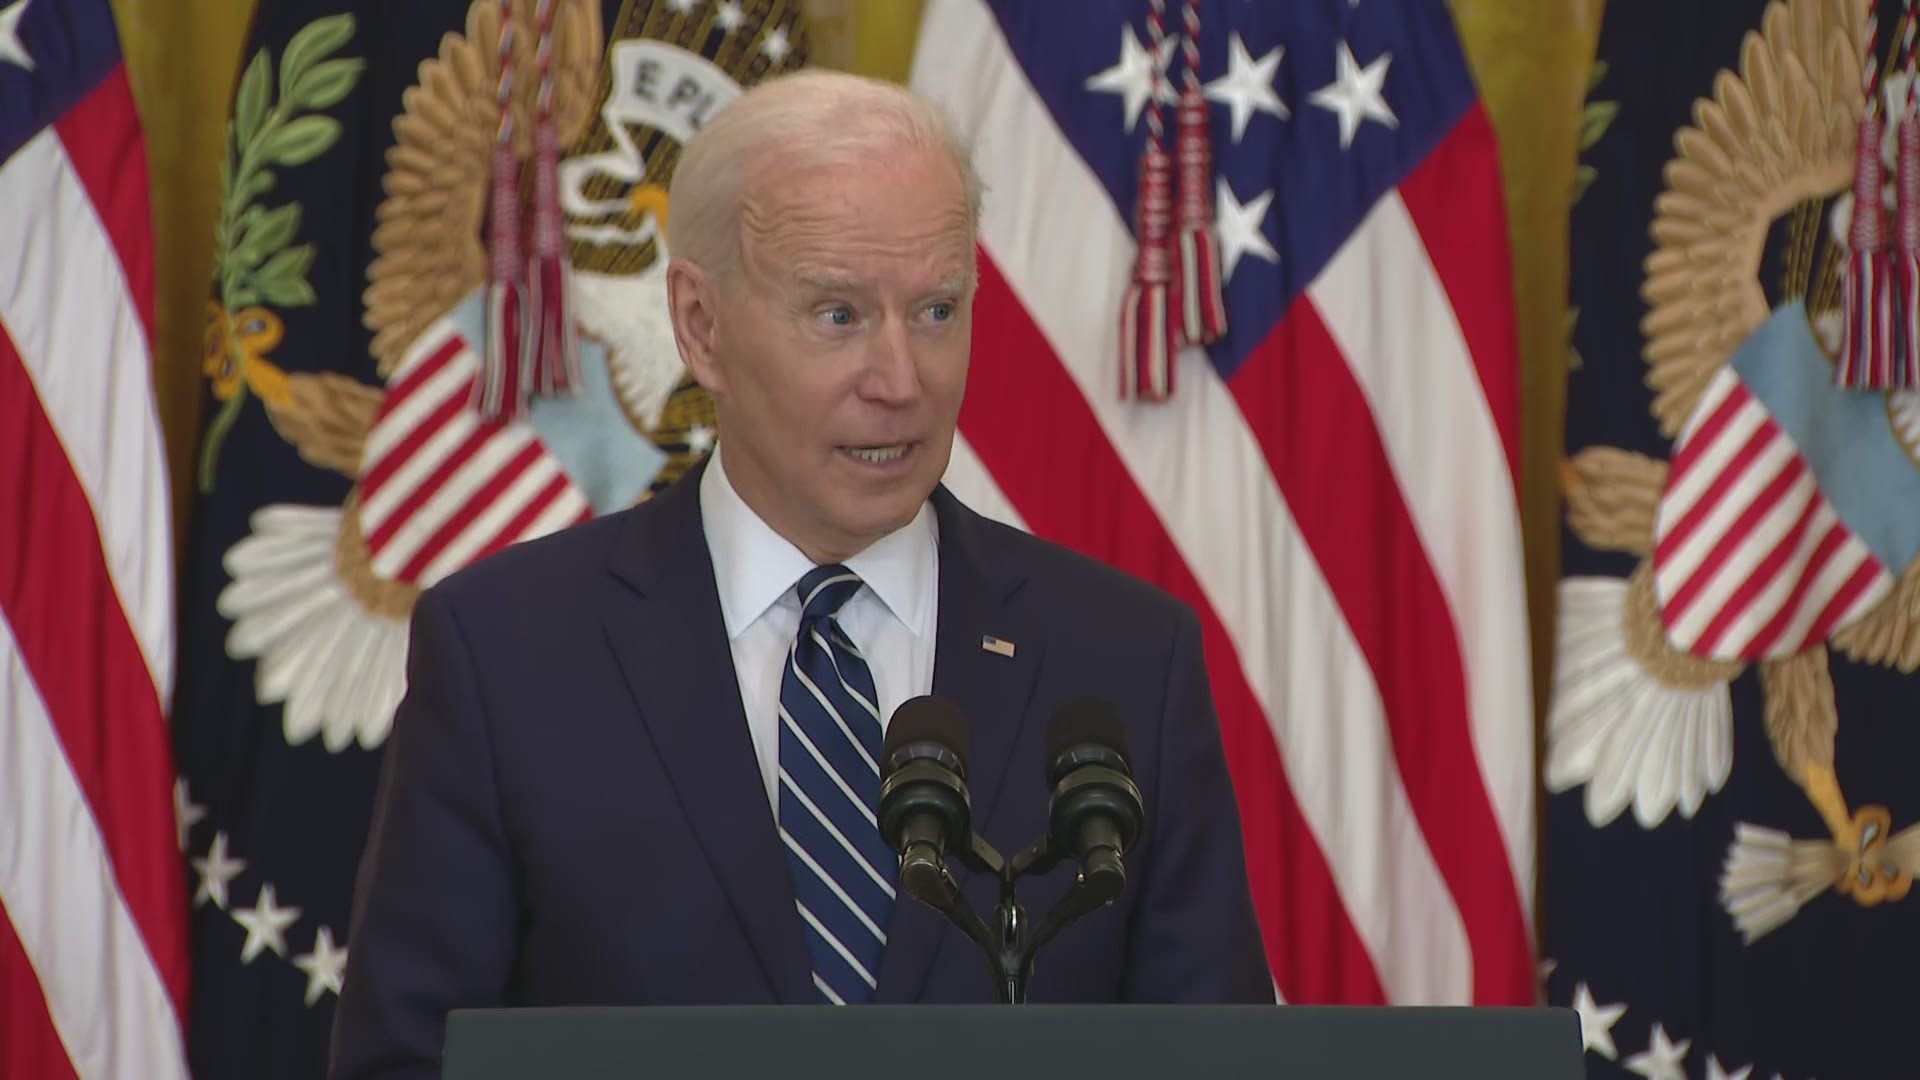 President Joe Biden says the US will leave Afghanistan, but doesn't have a timeline for when.